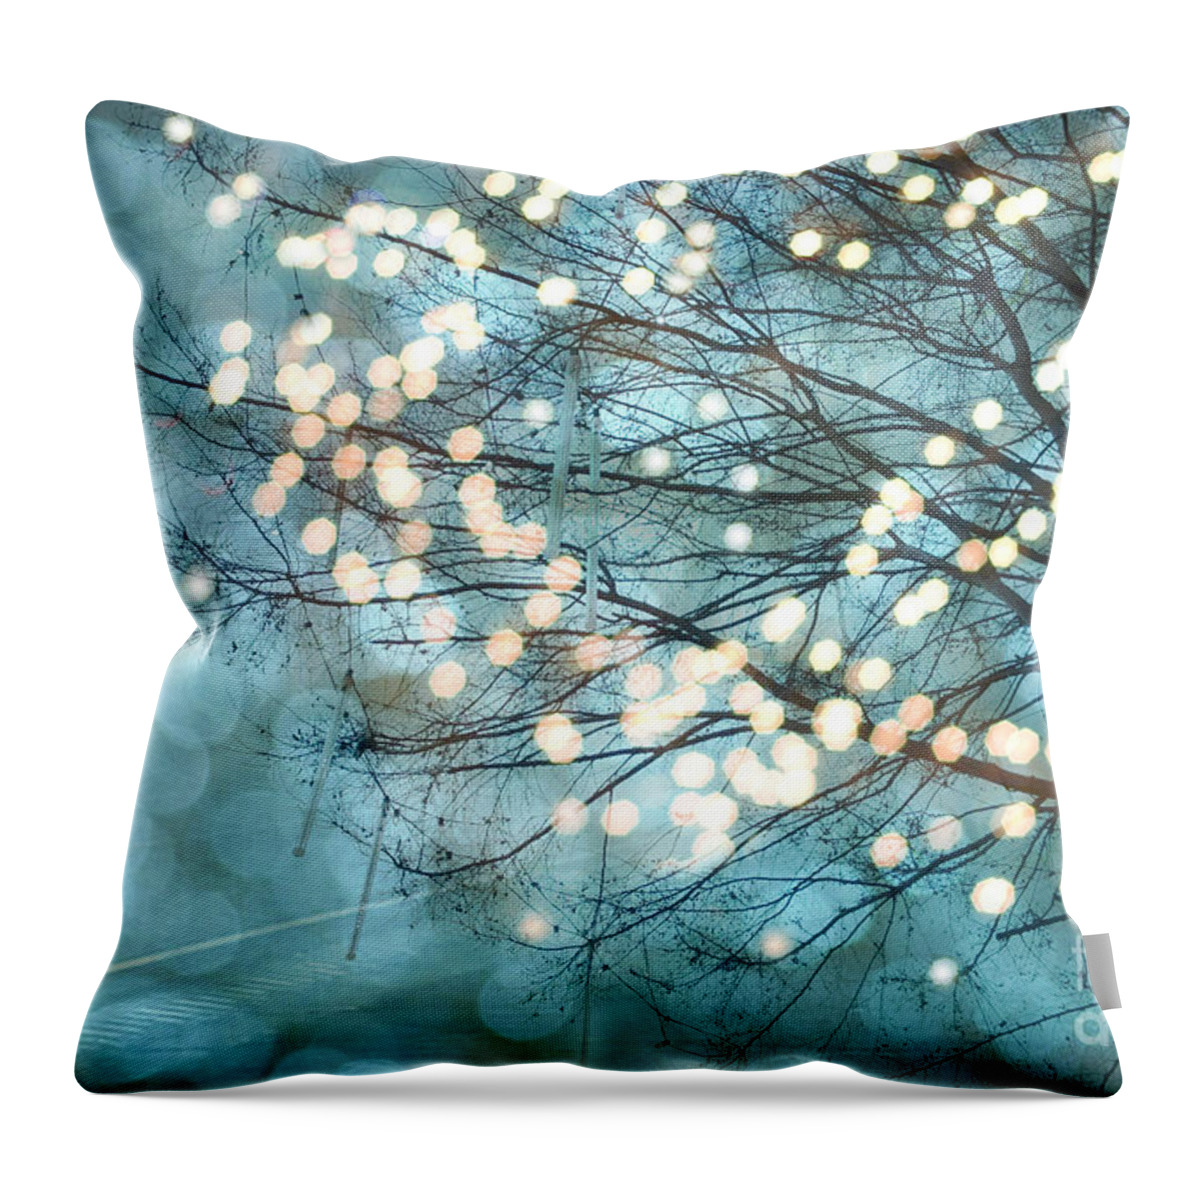 Fairy Lights Throw Pillow featuring the photograph Surreal Dreamy Aqua Teal Fairylights Fantasy Sparkling Aqua Teal Blue Bokeh Nature Trees by Kathy Fornal